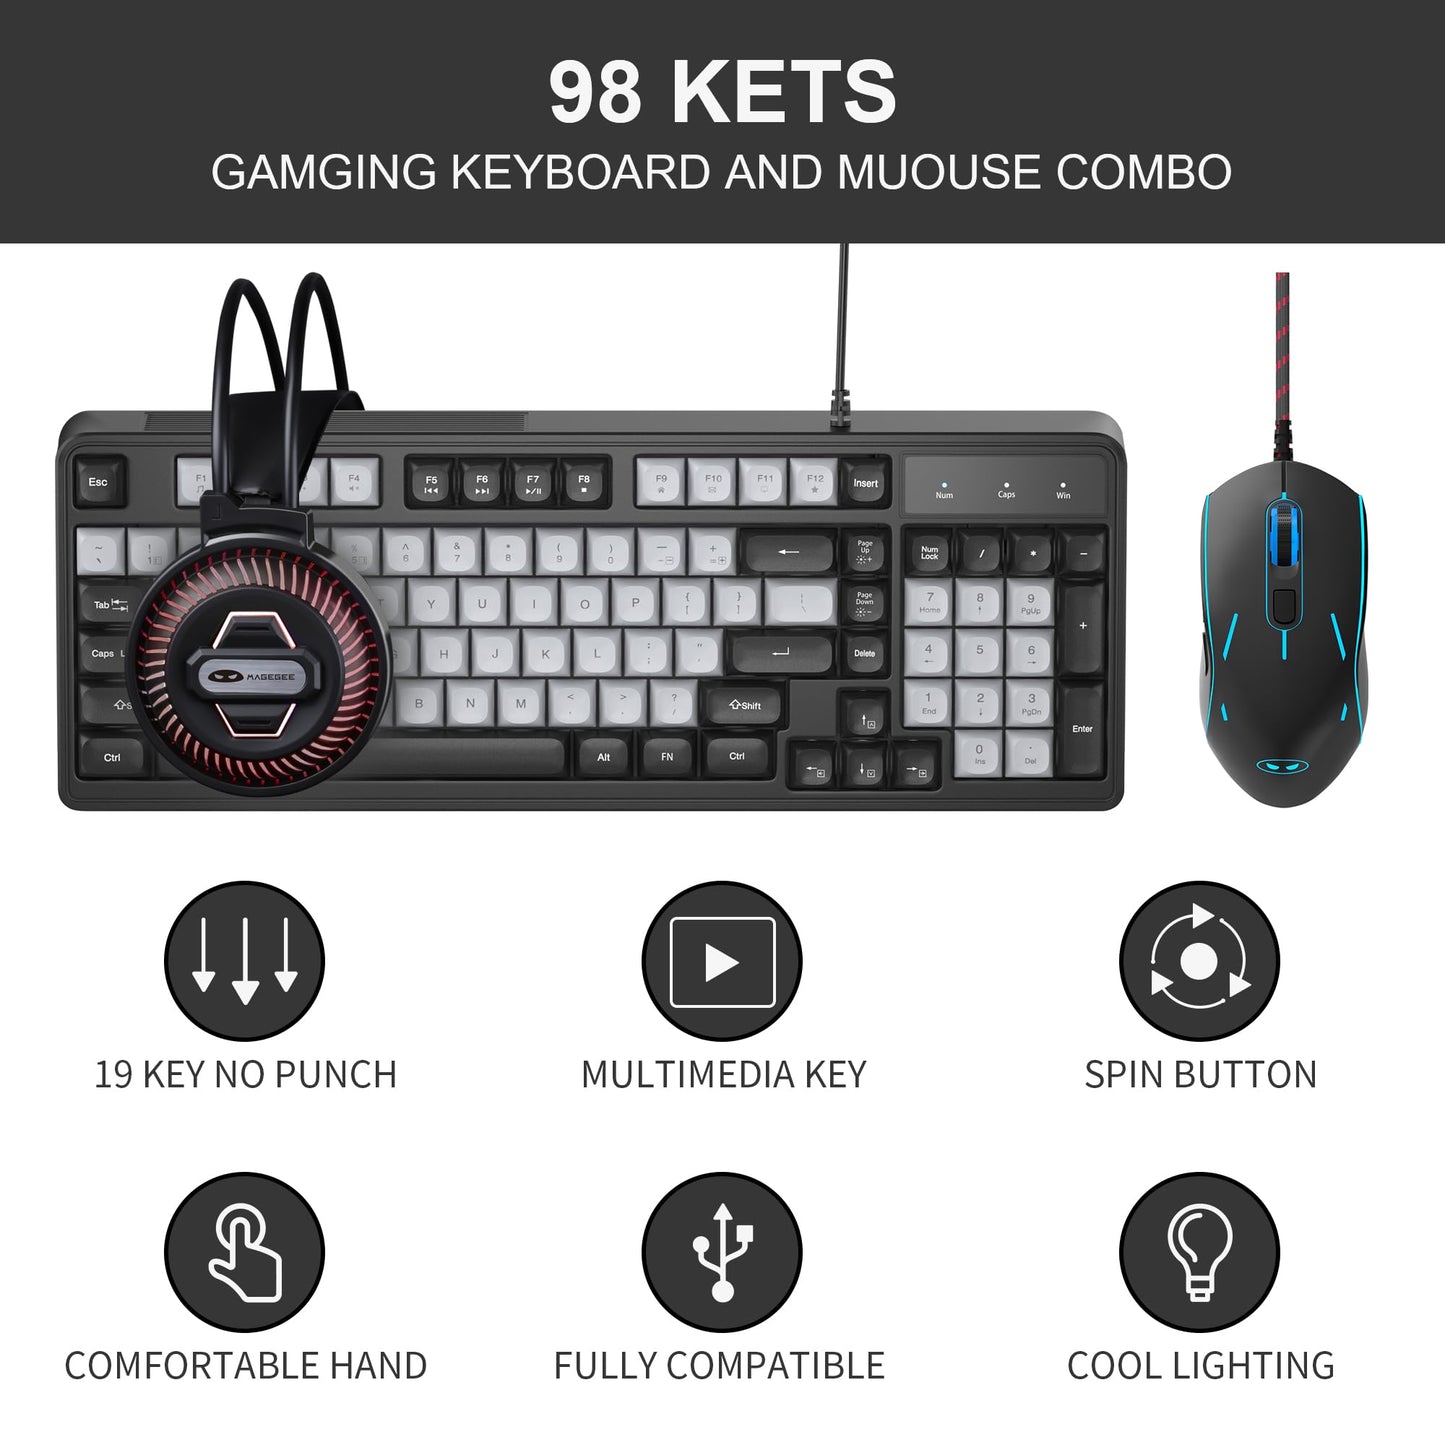 MageGee RGB Gaming Keyboard and Mouse Combo Headset,GK980 Wired Backlit Keyboard and Black Gaming Mouse Combo,PC Keyboard and Adjustable DPI Mouse for PC/loptop/MAC(Black Grey)…